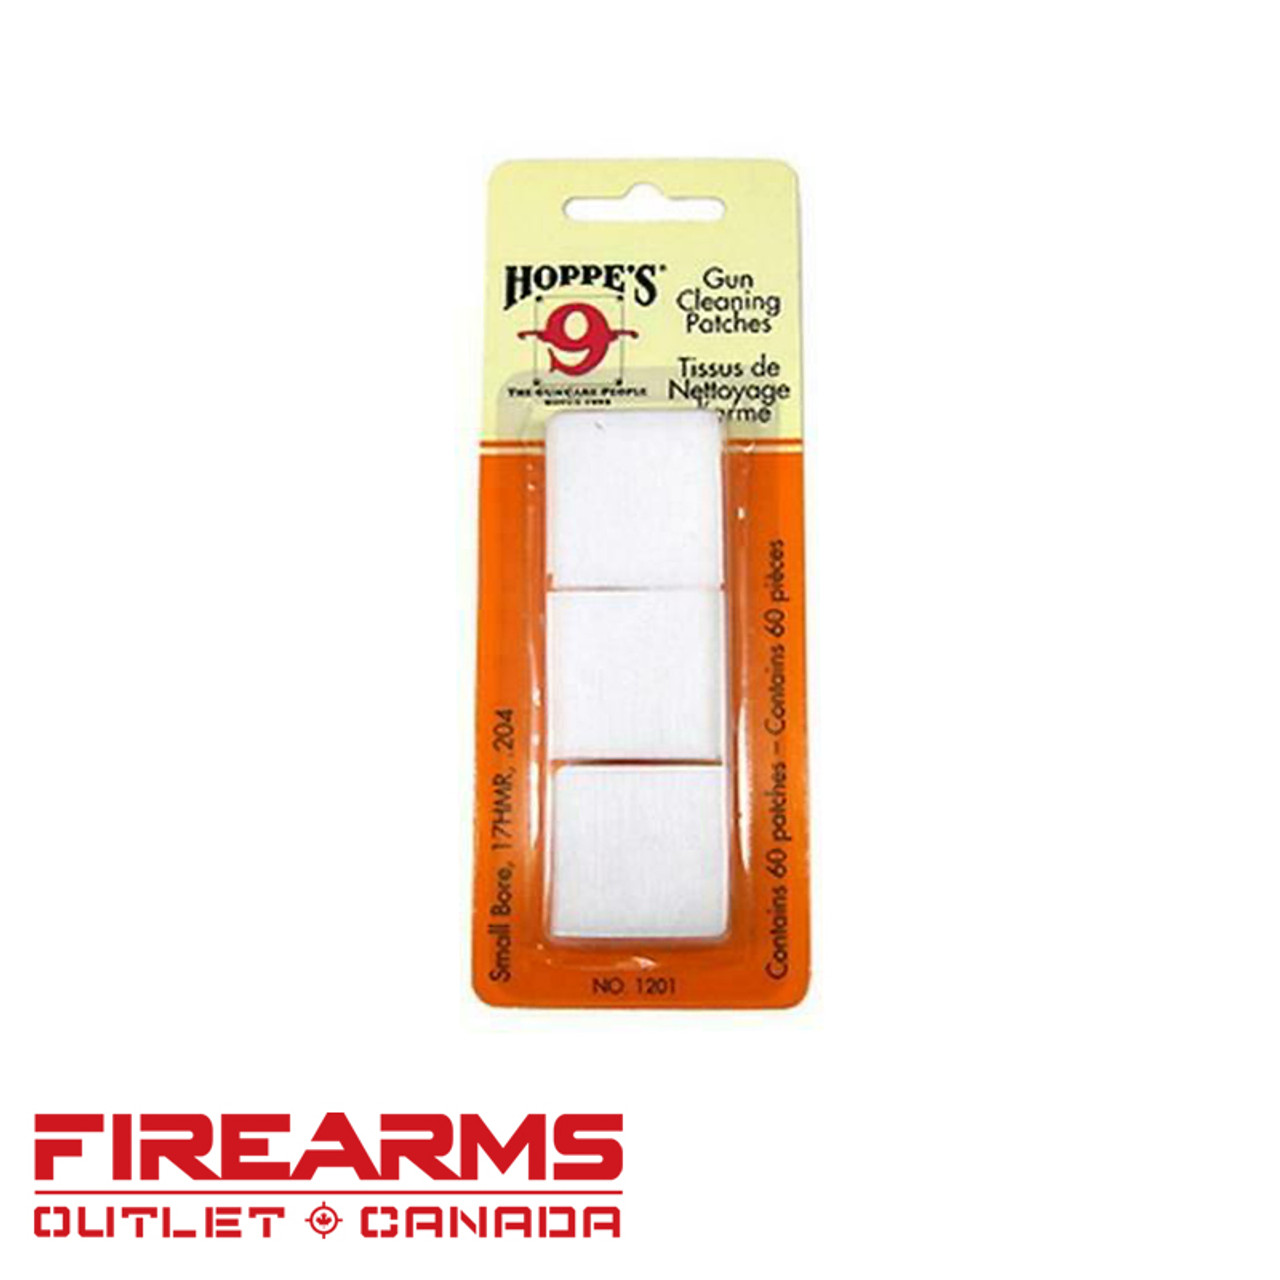 Hoppe's Gun Cleaning Patches - .17 HMR, .204 Cal., 60 Pack  [1201]